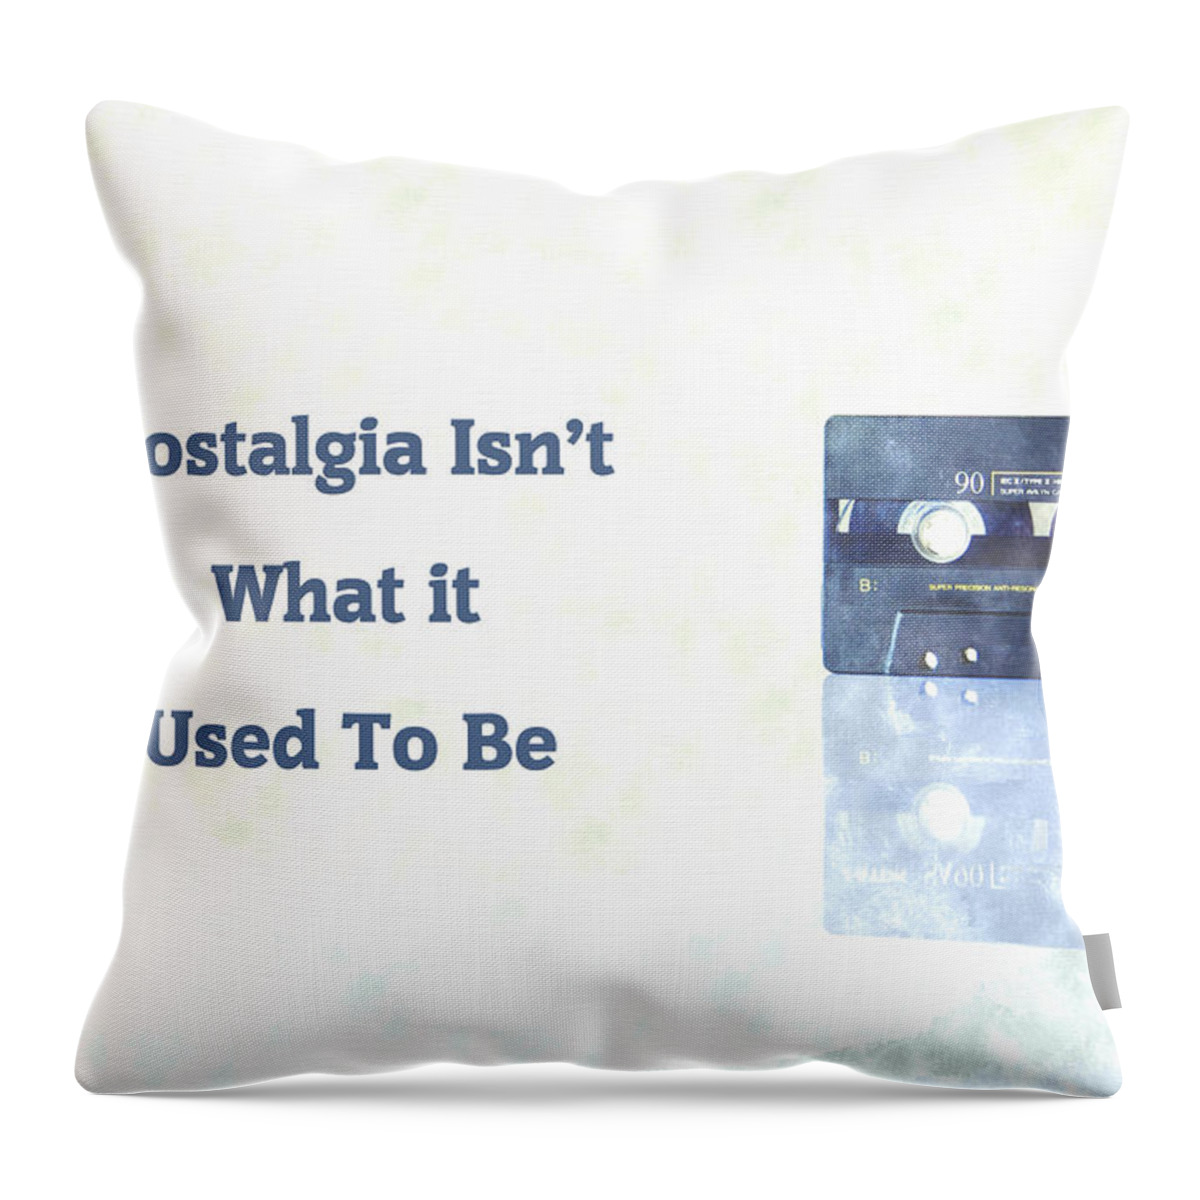 Nostalgia Isn�t What It Used To Be Throw Pillow featuring the digital art Nostalgia Isnt What It Used To Be by Anthony Murphy